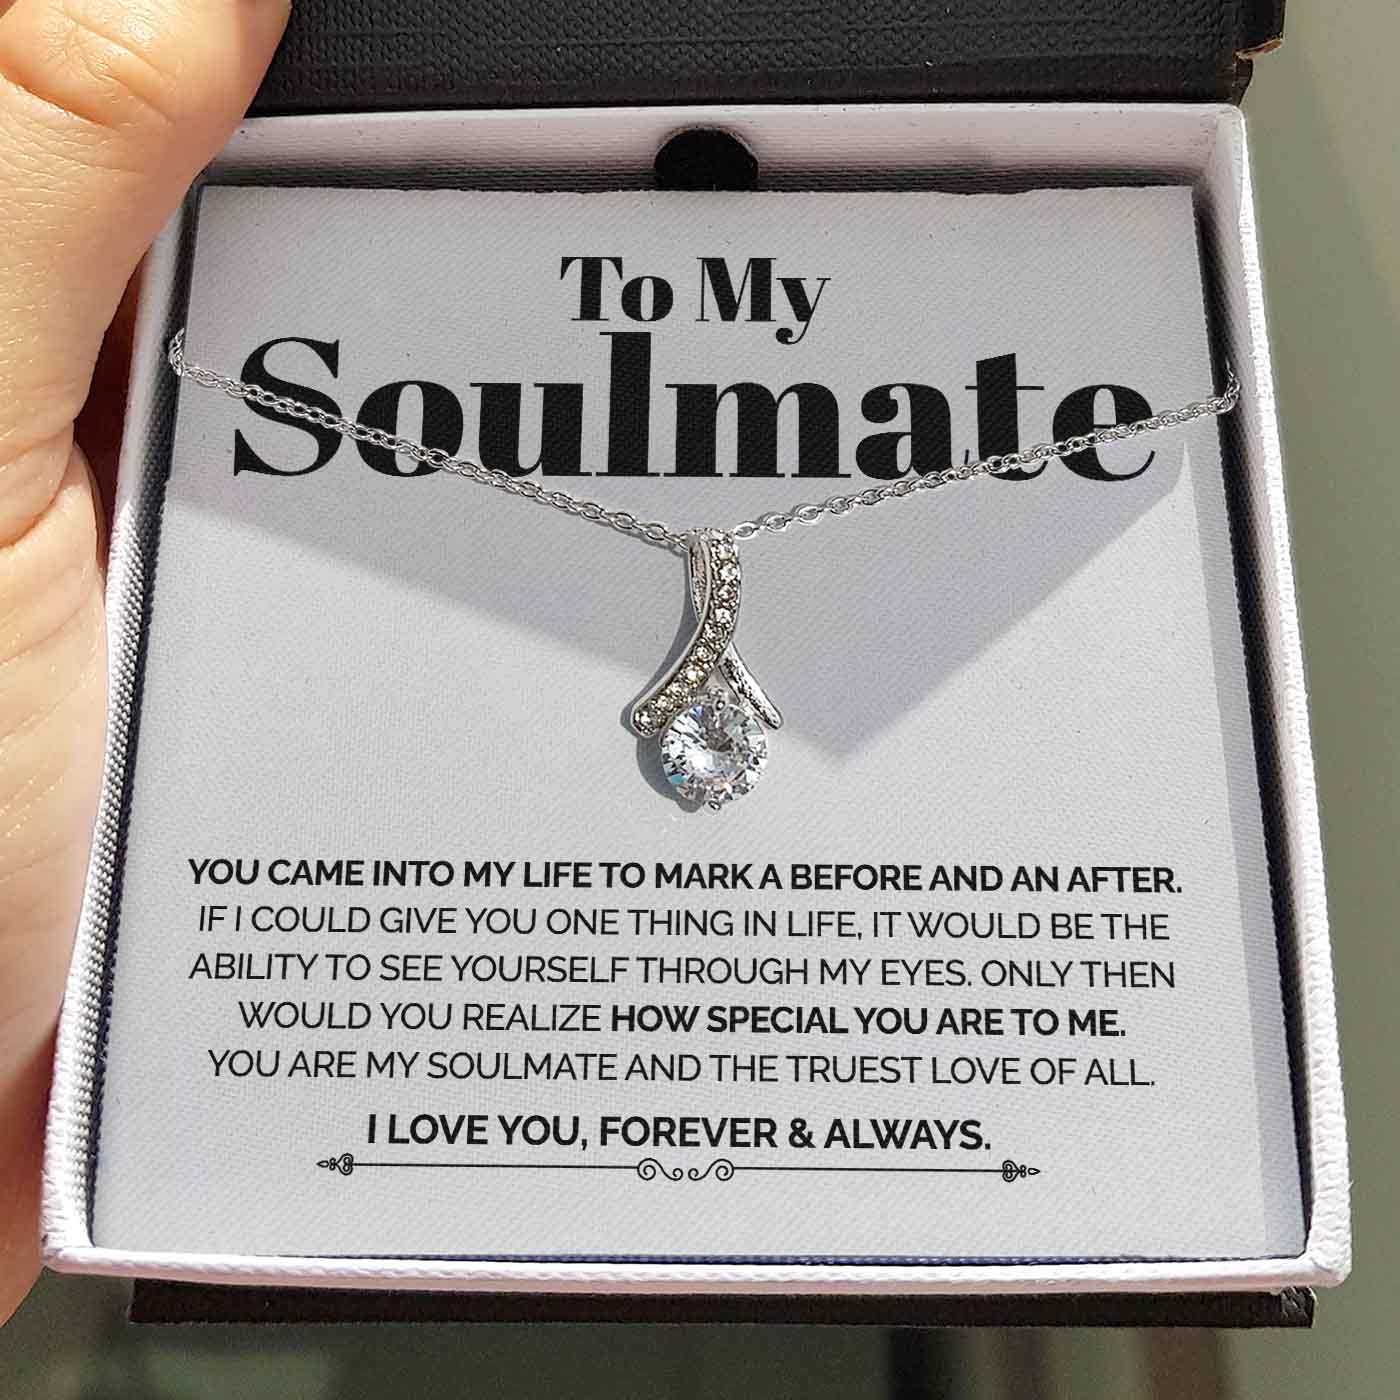 ShineOn Fulfillment Jewelry Standard Box To My Soulmate - You came into my life - Ribbon Necklace